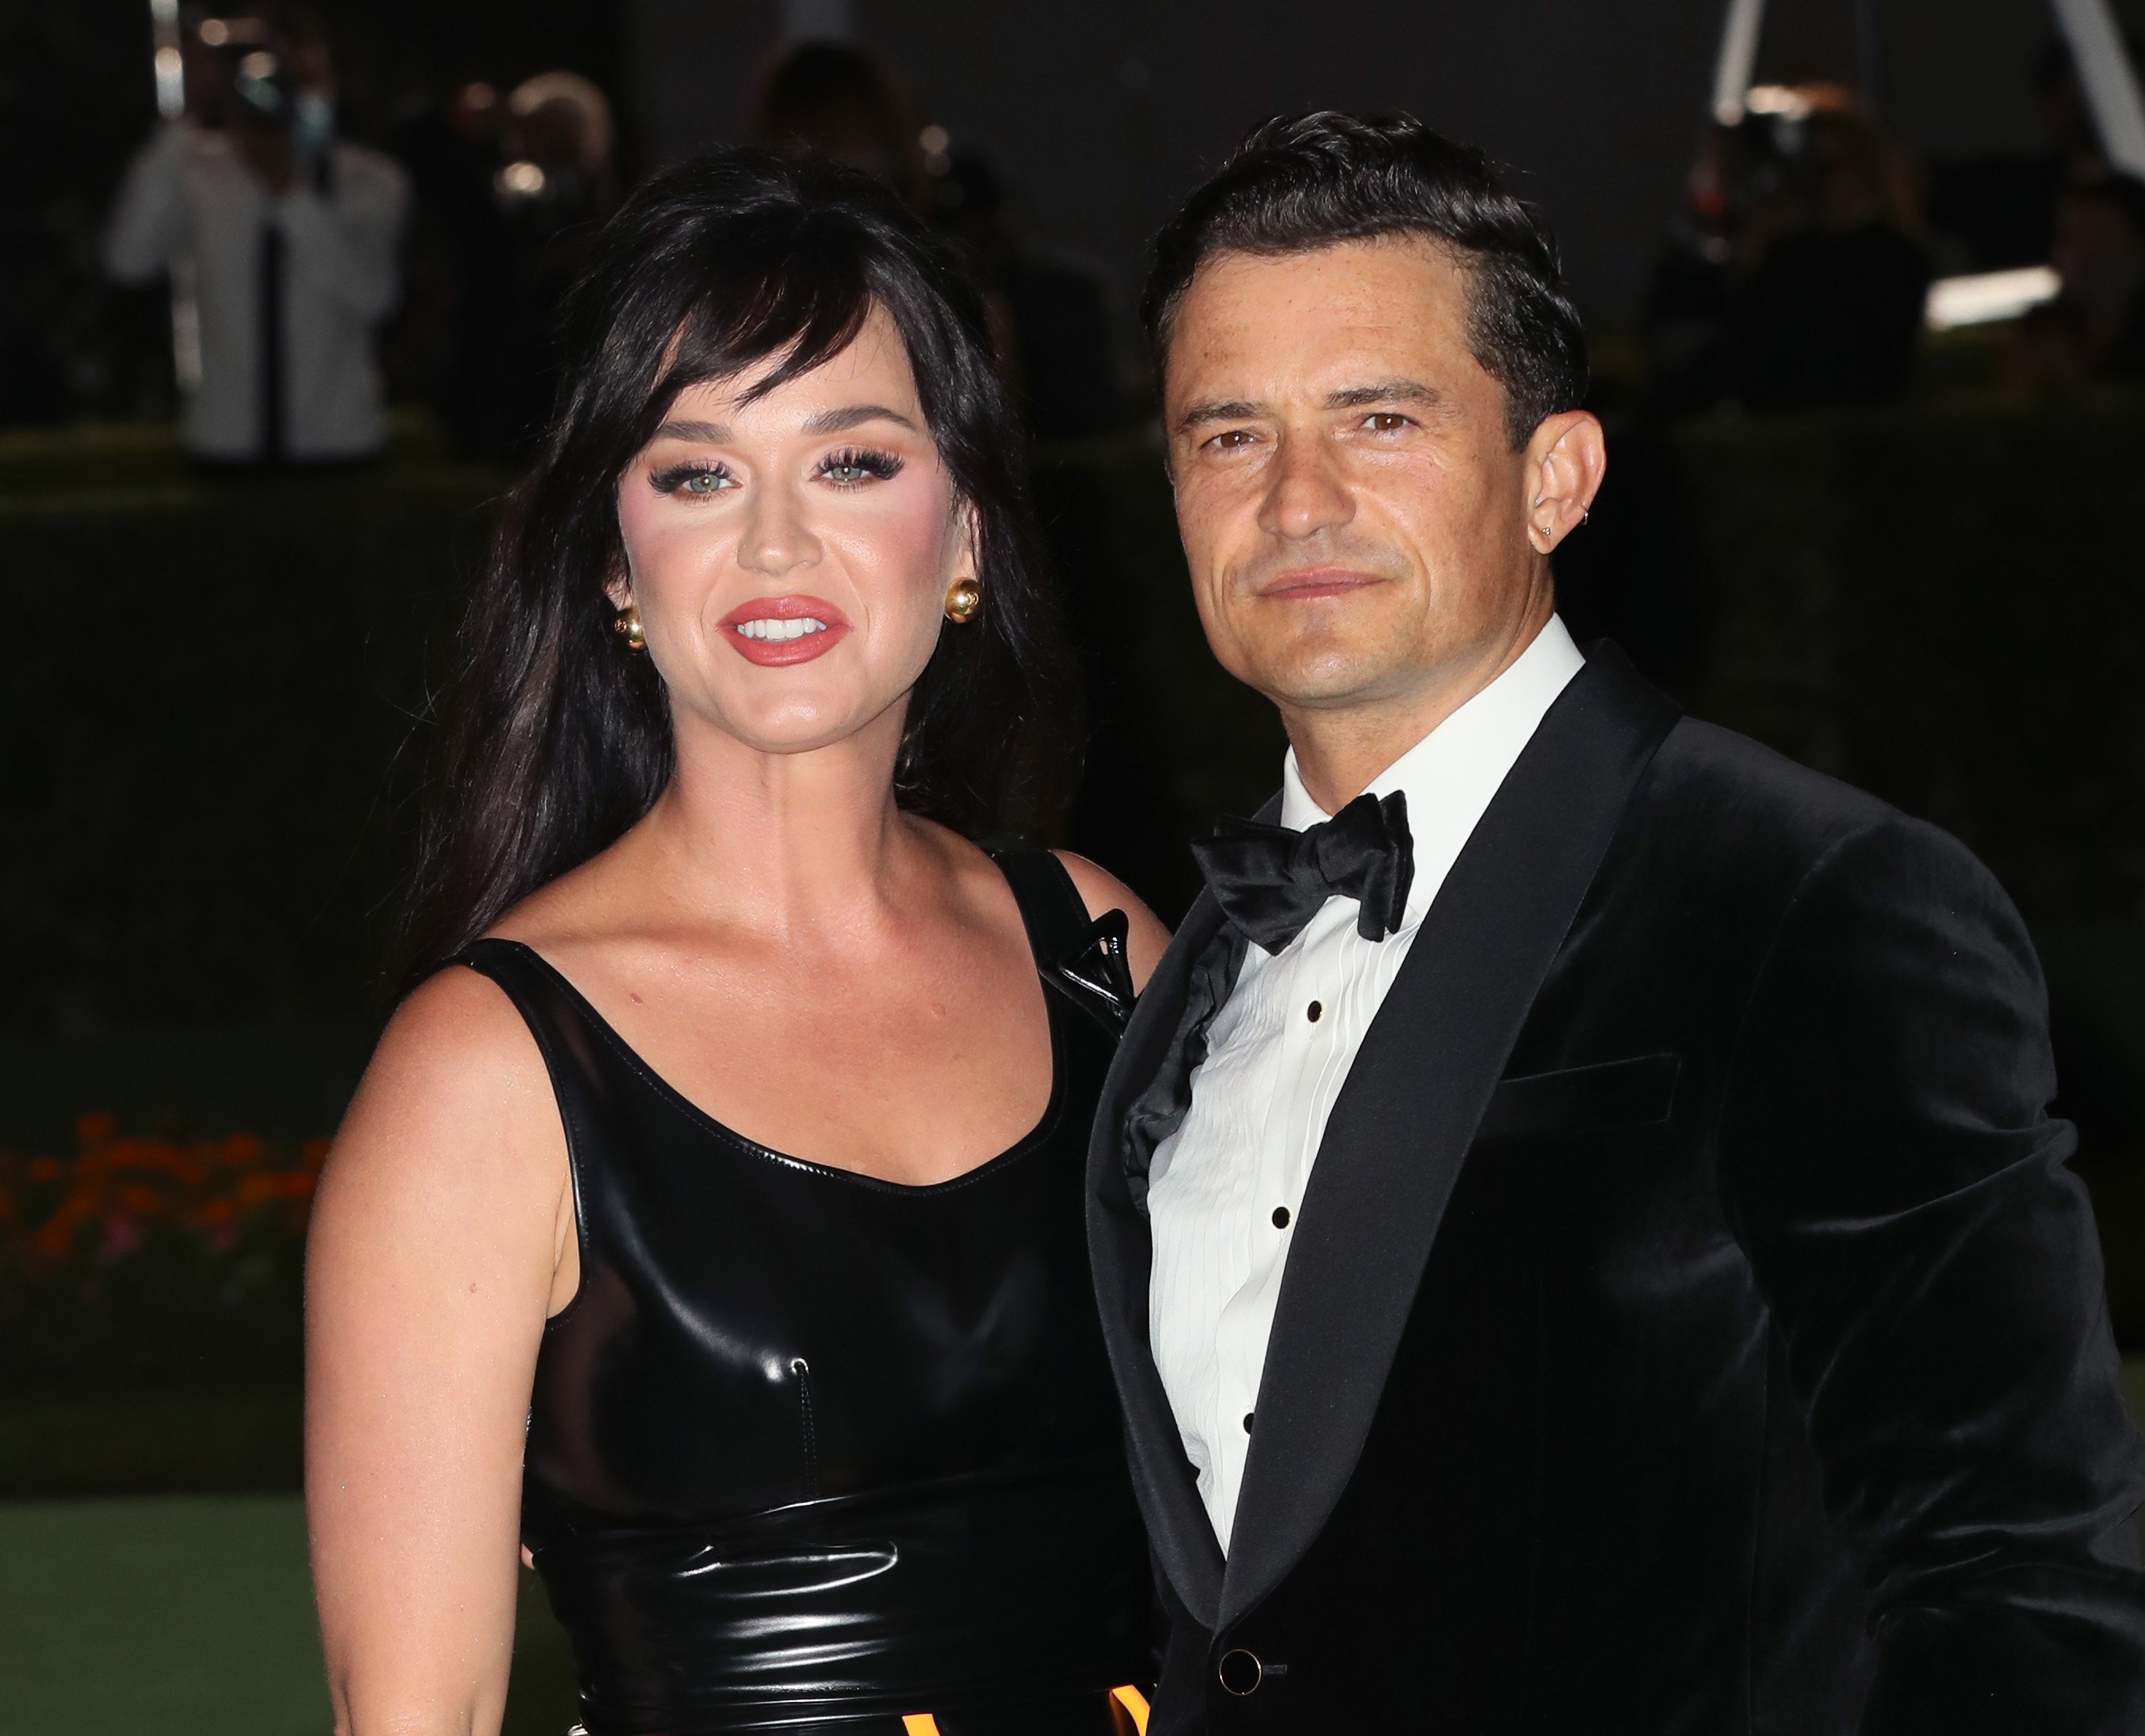 Katy Perry and Orlando Bloom pose for a photo together outside The Academy Museum of Motion Pictures Opening Gala